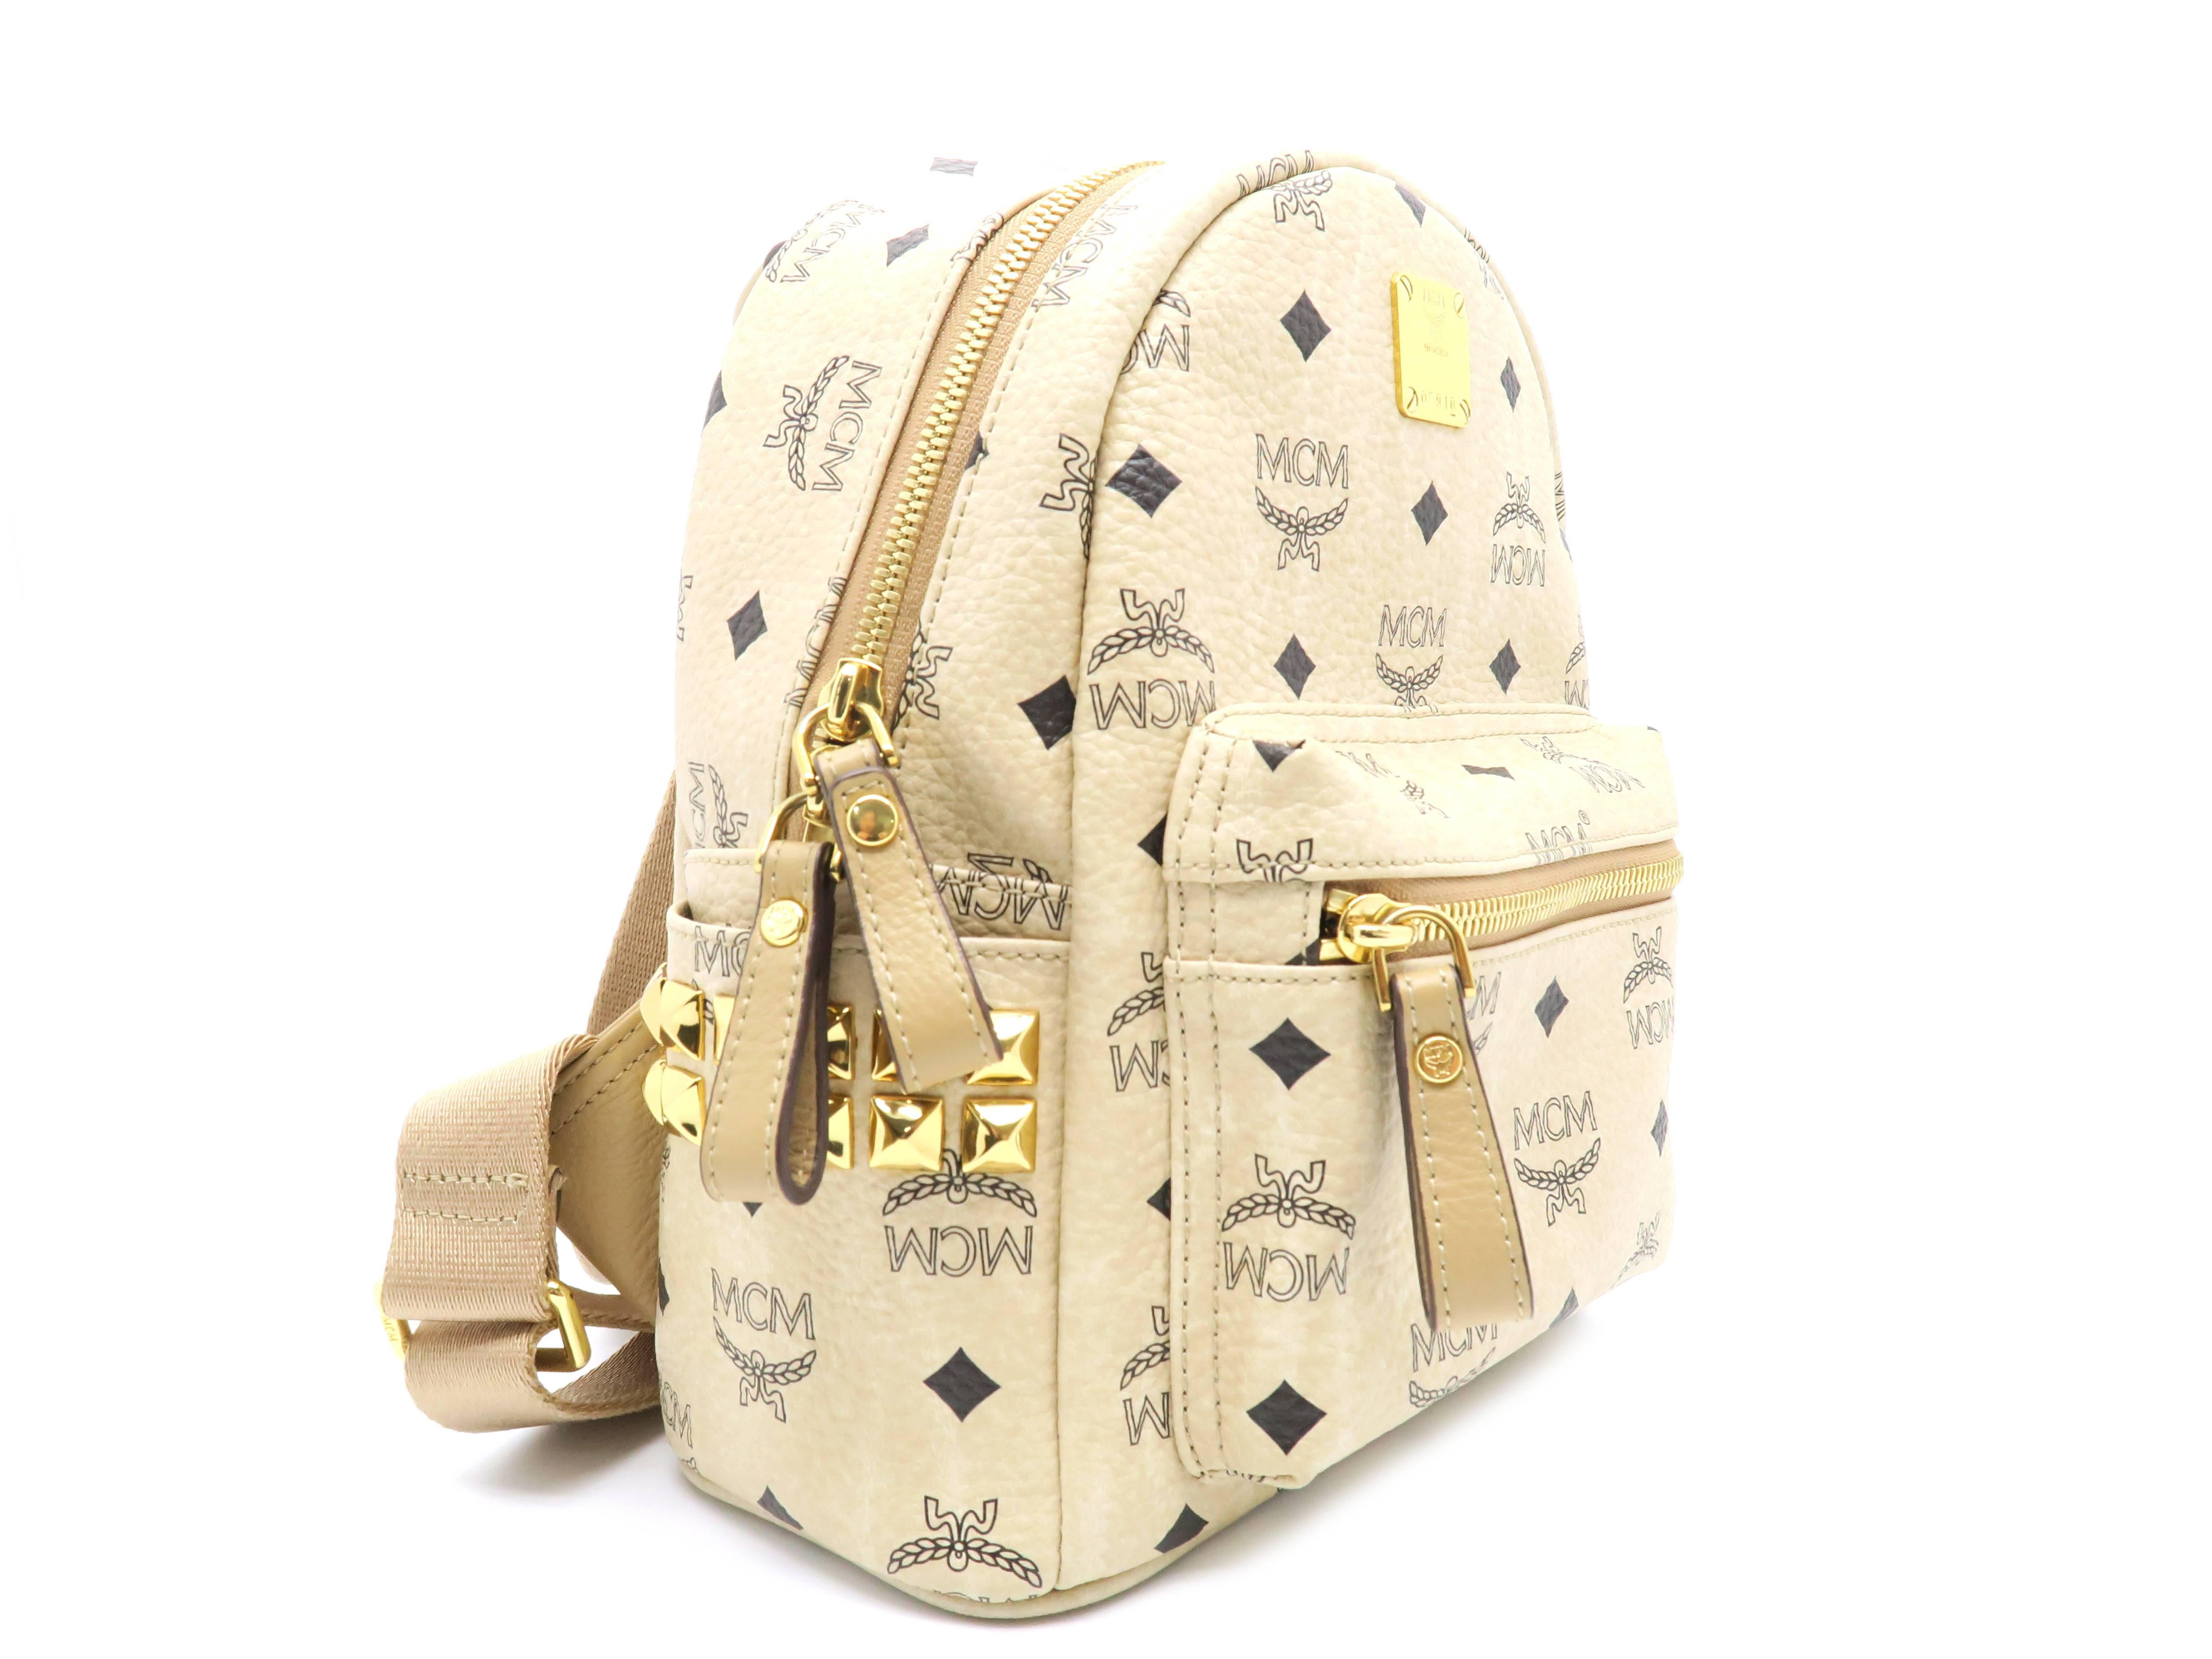 Color: Beige

Material: Coated Canvas

Condition: Rank S
Overall: Almost New
Surface: Good
Corners: Good
Edges: Good
Handle/Strap: Good
Hardware: Good

Dimensions: W22×H26×D10.5cm
Shoulder Strap: 56cm - 93cm

***This item does not come with any